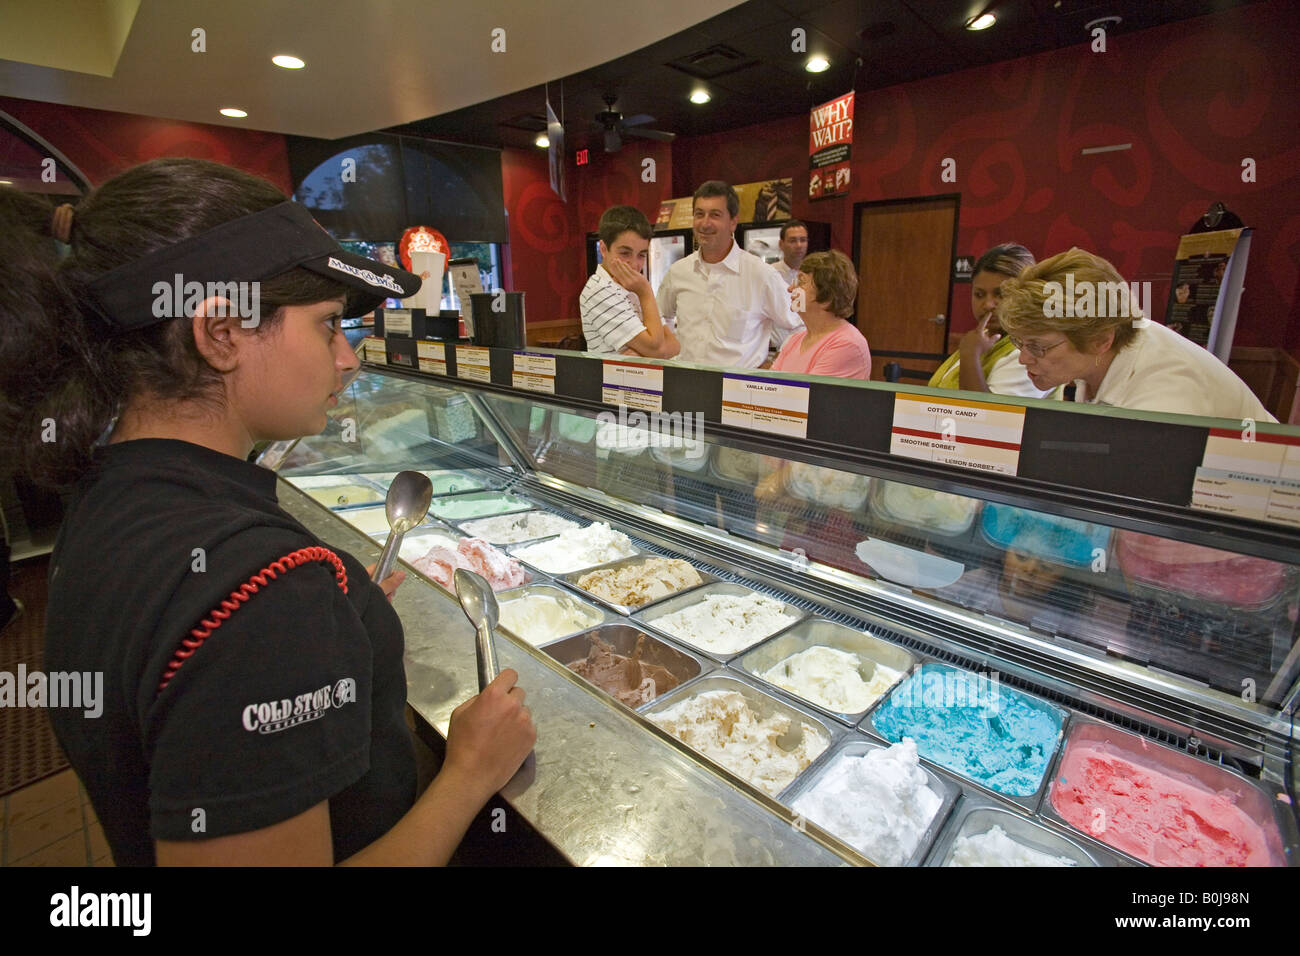 Grosse Pointe Michigan Samantha Dabain 18 scoops ice cream for customers at a Cold Stone Creamery store Stock Photo